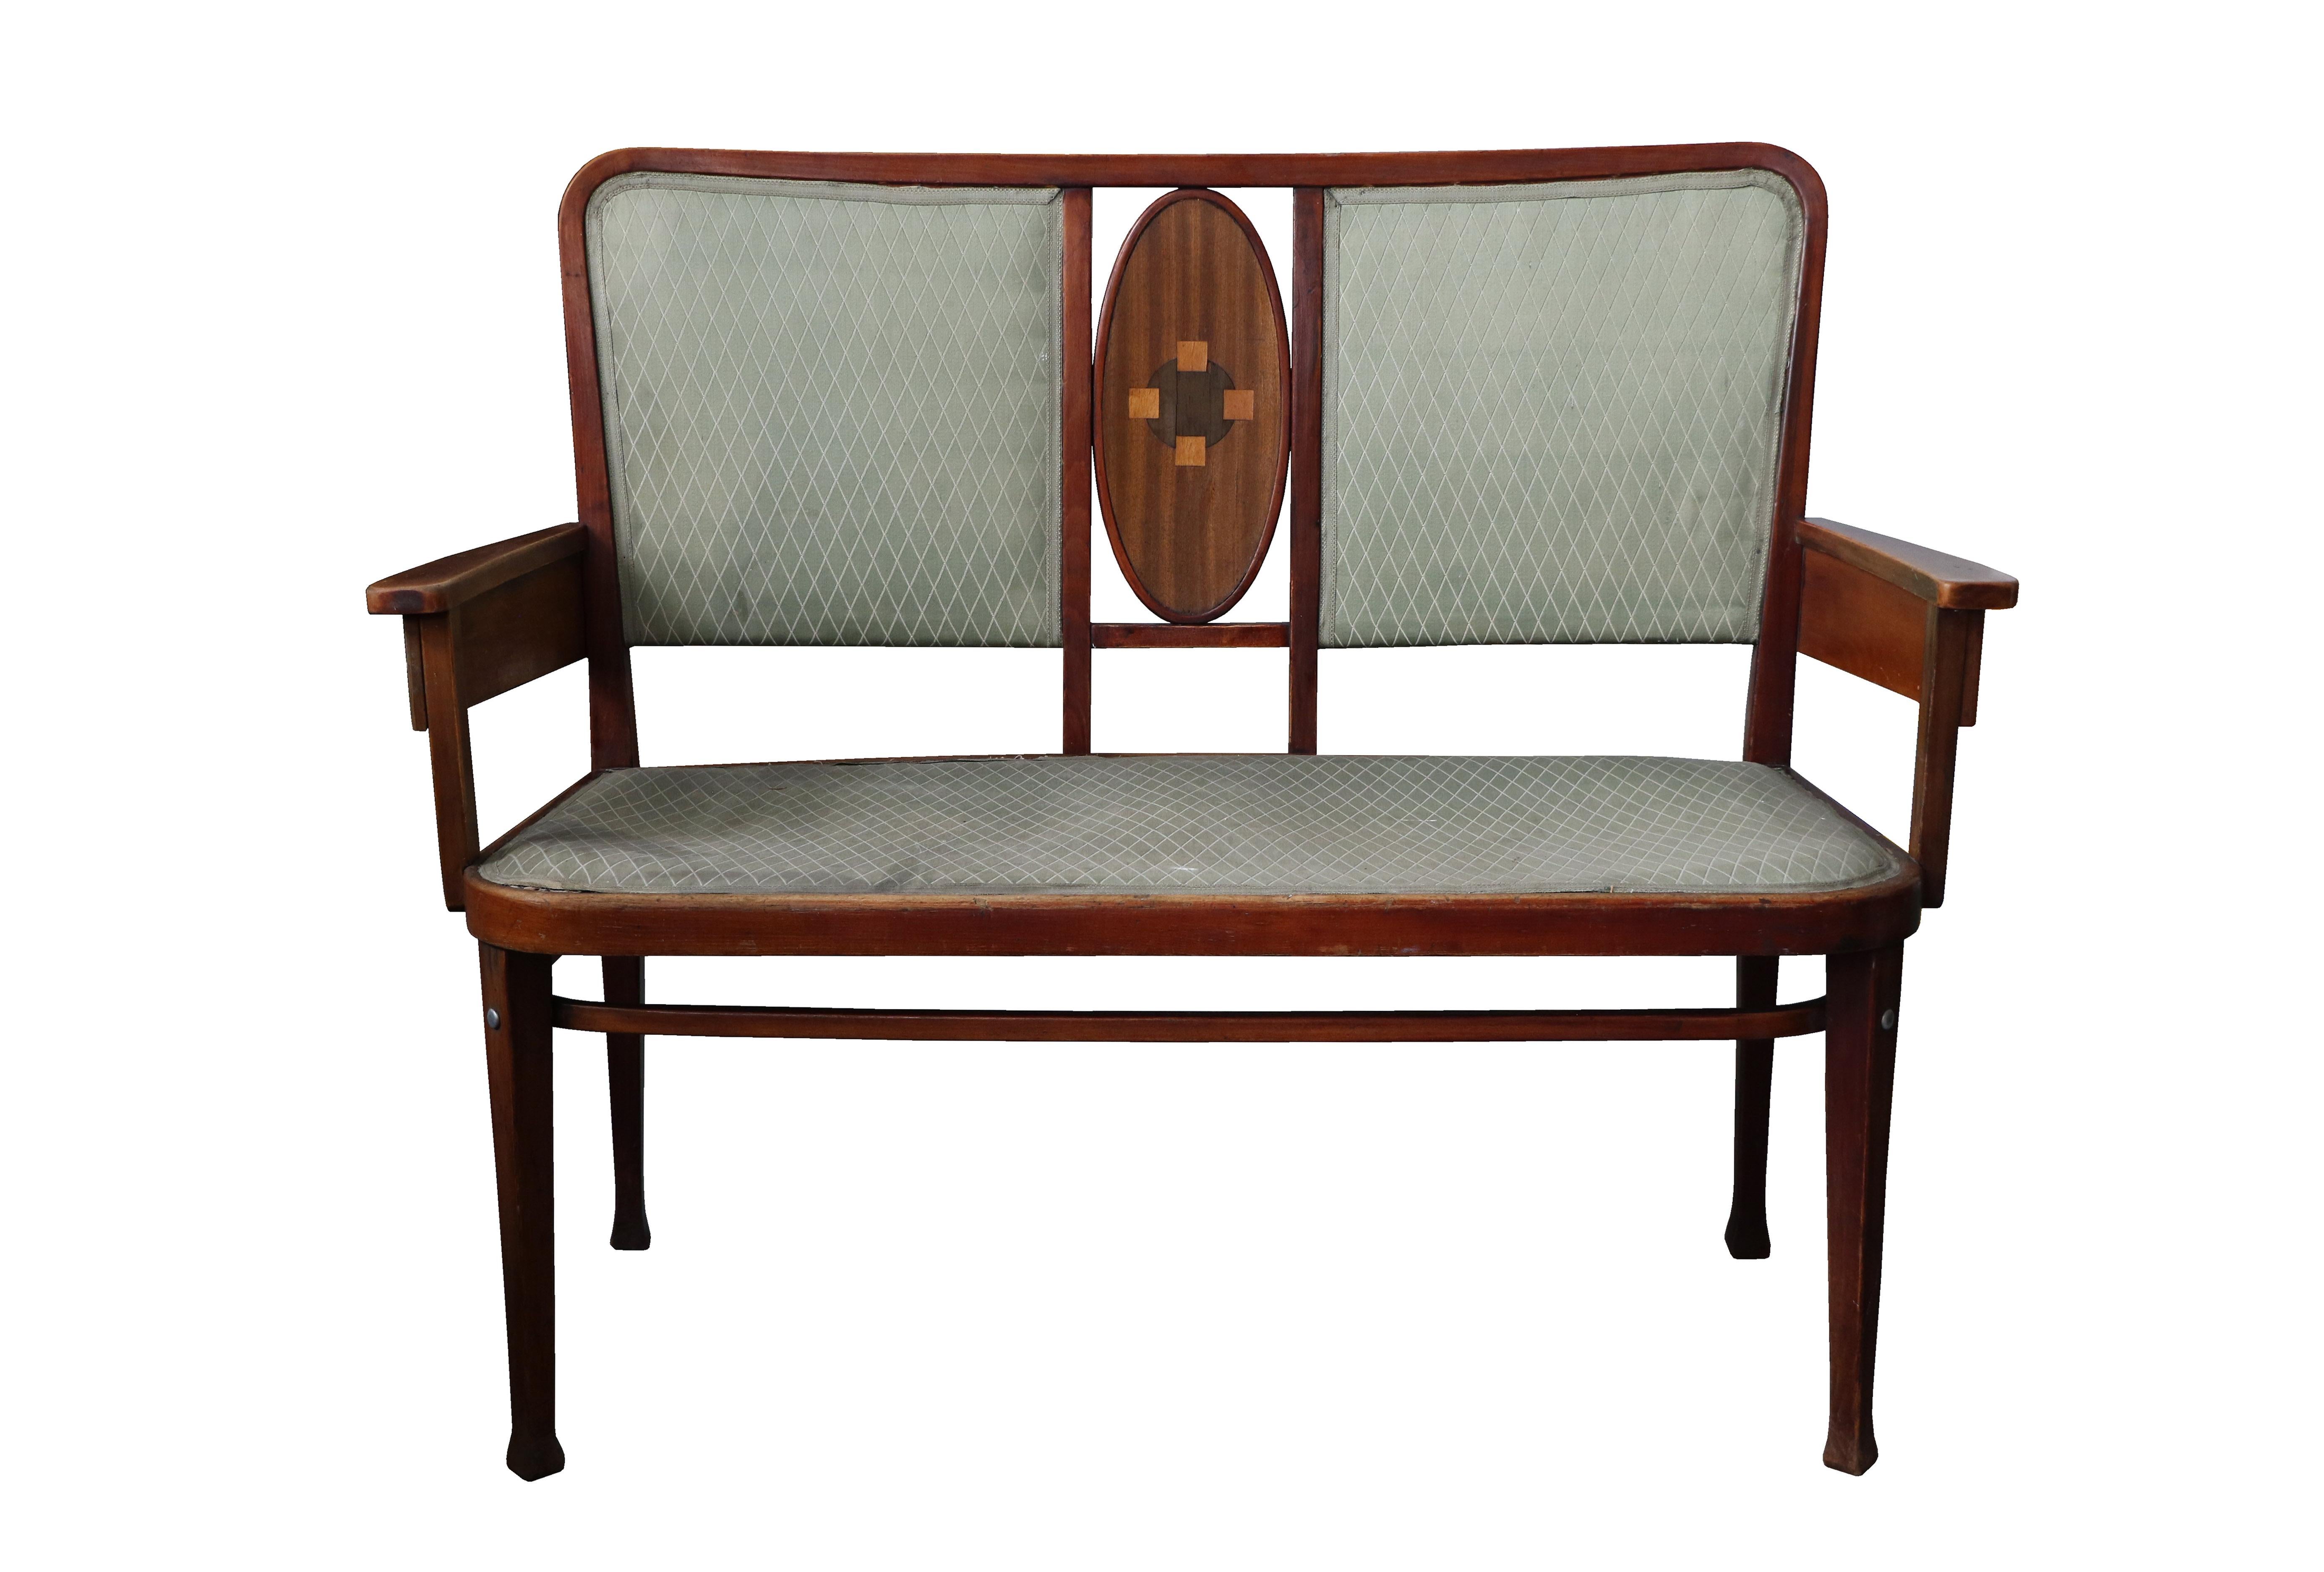 Upholstery 20th Century Fine Set of Thonet Art Nouveau by Marcel Kammerer. Vienna, C. 1910. For Sale